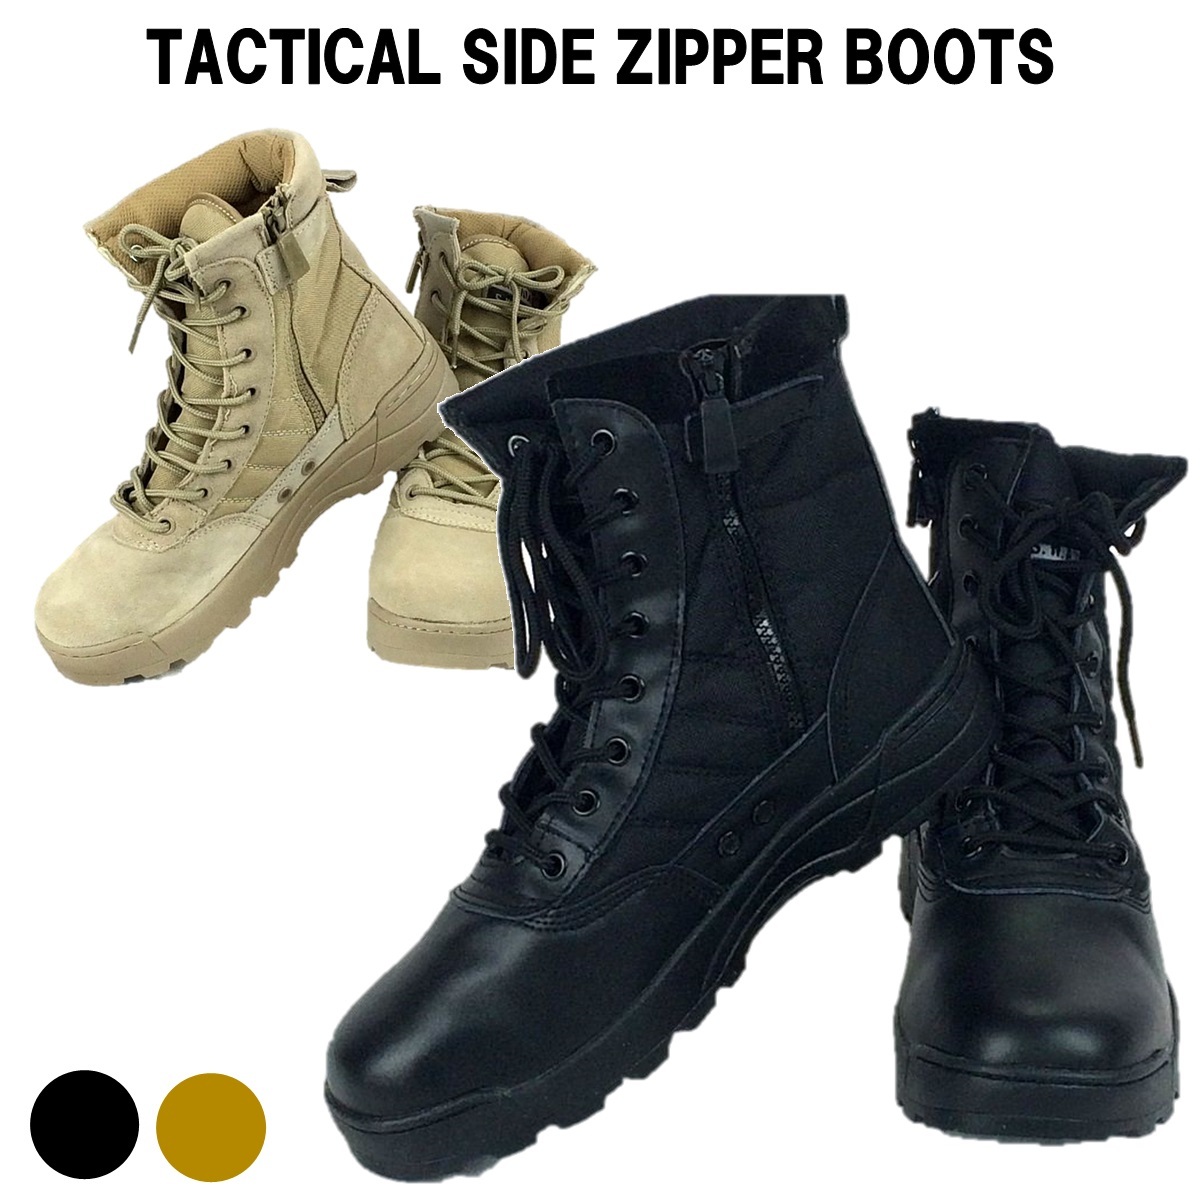 TAN 25.5cm military boots Tacty karu boots combat boots rider boots work shoes shoes side zipper mackerel ge men's boots 